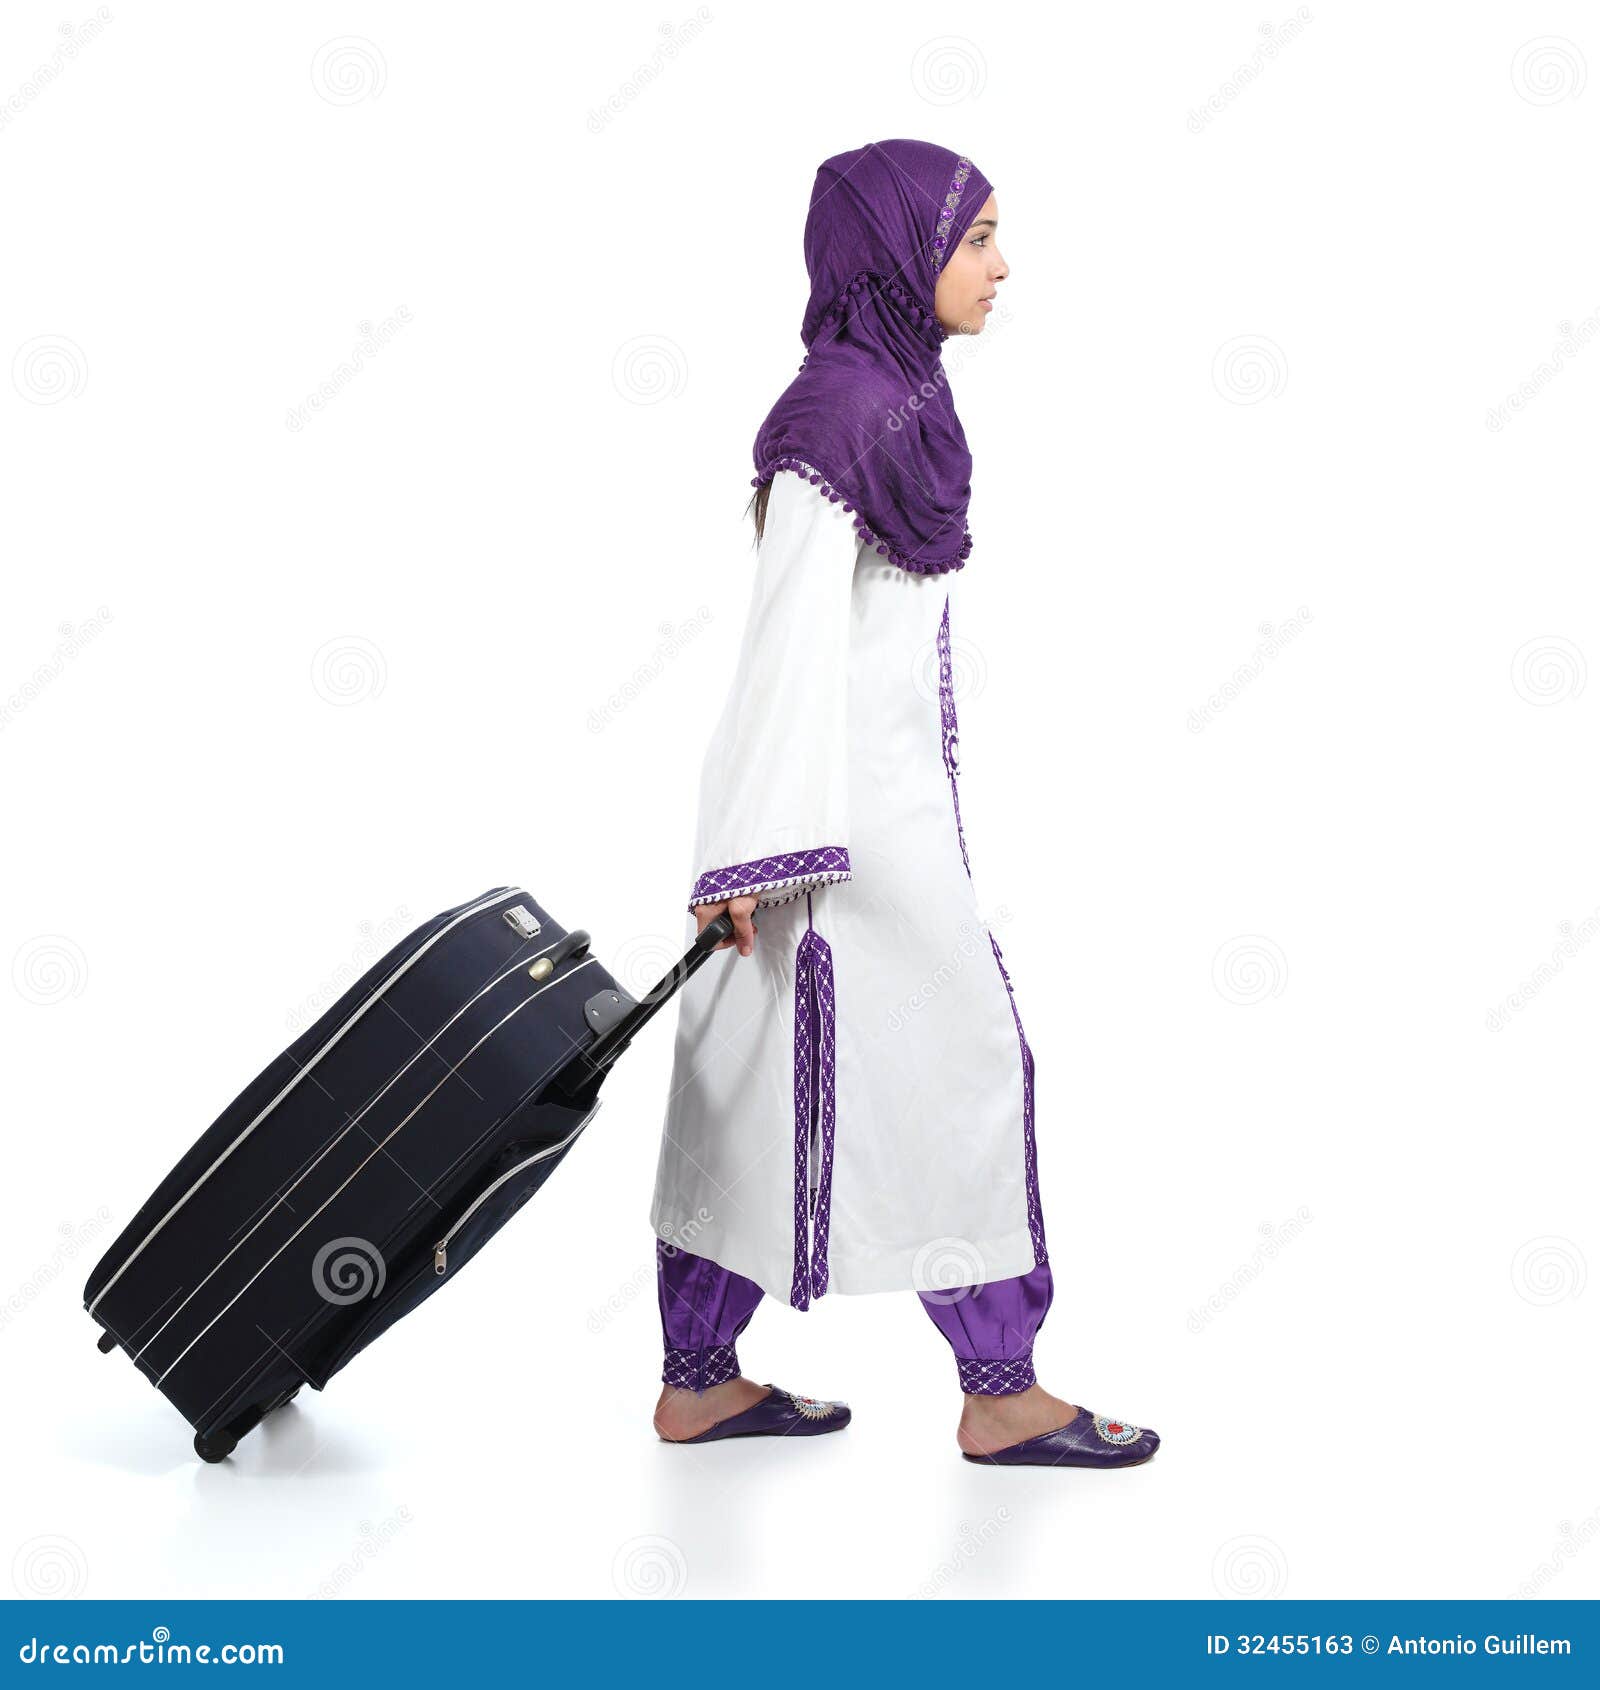 muslim immigrant woman wearing a hijab walking carrying a suitcase